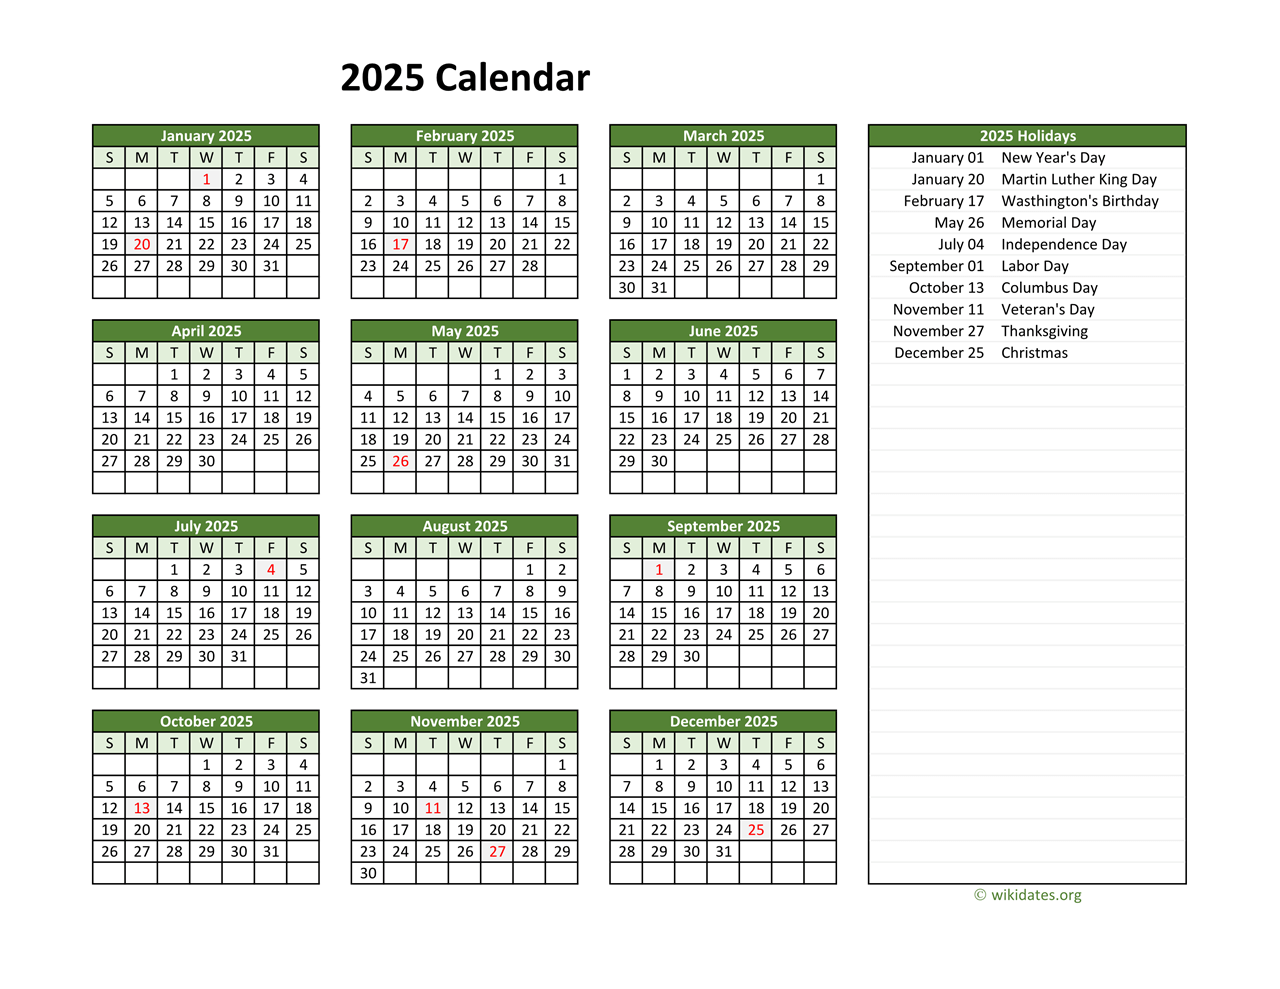 Printable 2025 Calendar with Federal Holidays  WikiDates.org